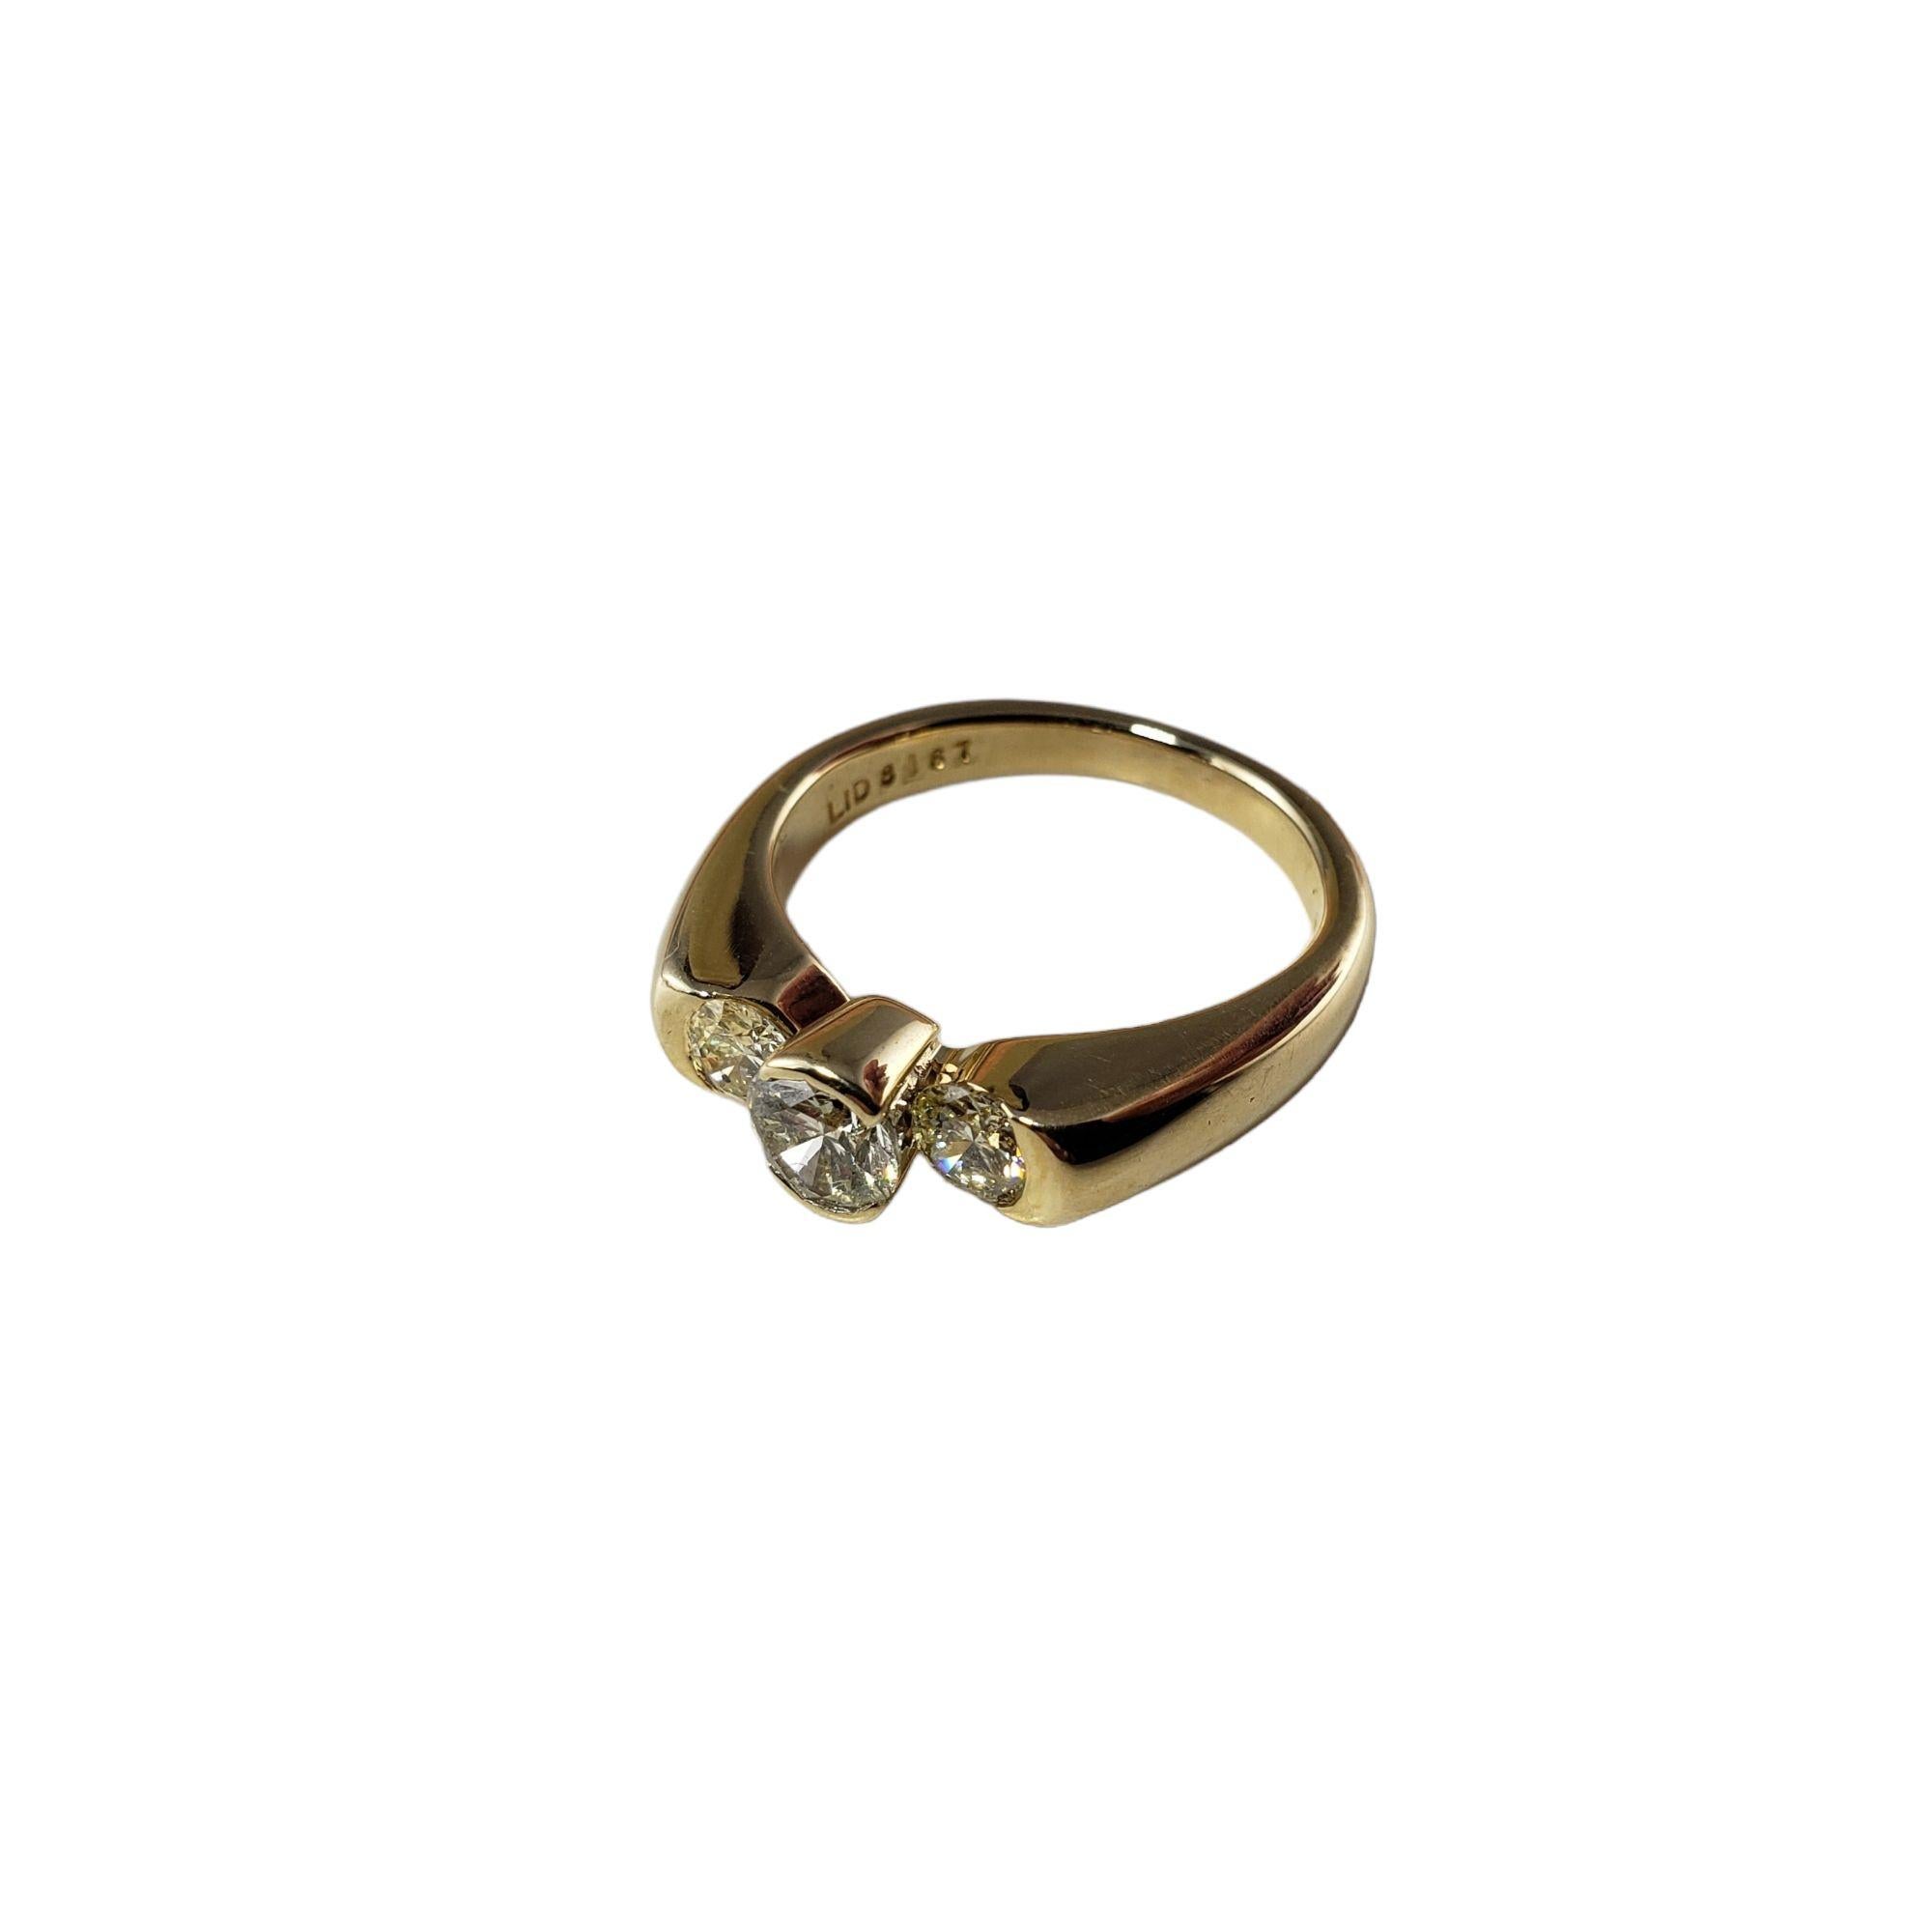 Vintage 14 Karat Yellow Gold and Diamond Ring Size 5.75 JAGi Certified-

This sparkling ring features three round brilliant cut diamonds set in classic 14K yellow gold. Width: 6 mm.
Shank: 2 mm.

Total diamond weight: .88 ct.

Diamond color: